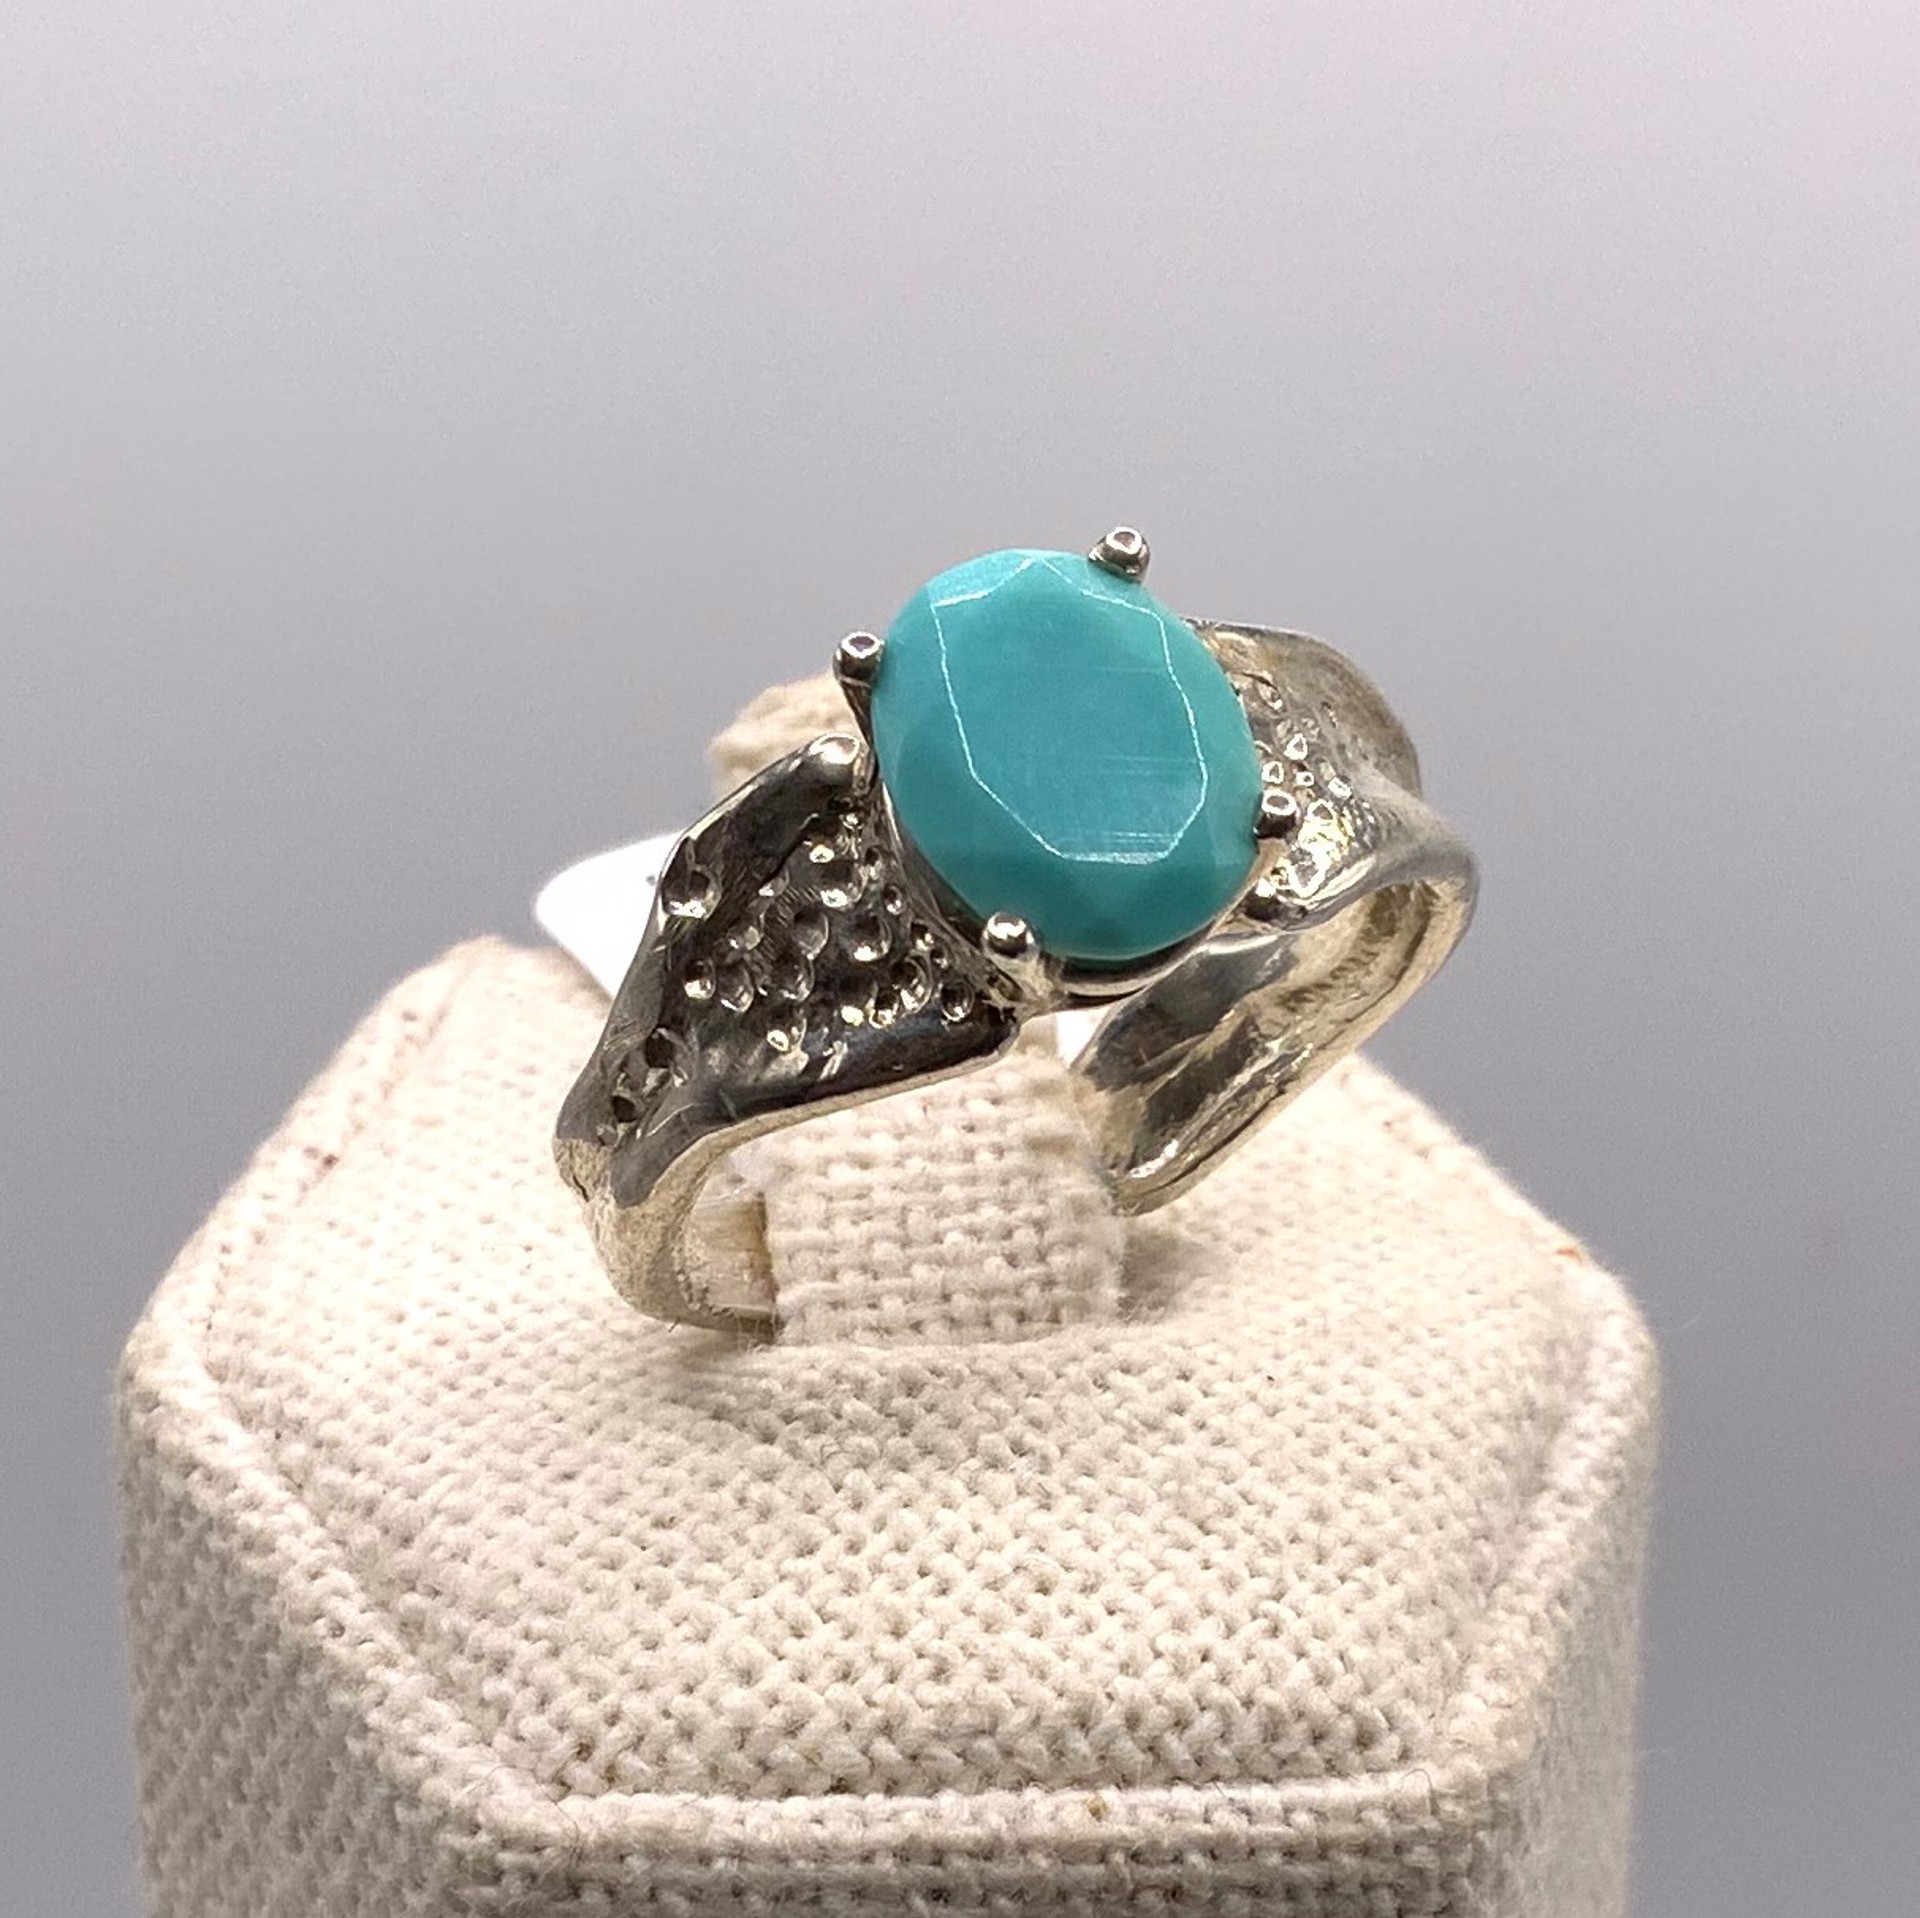 Turquoise Ripple Ring by Kristen Baird